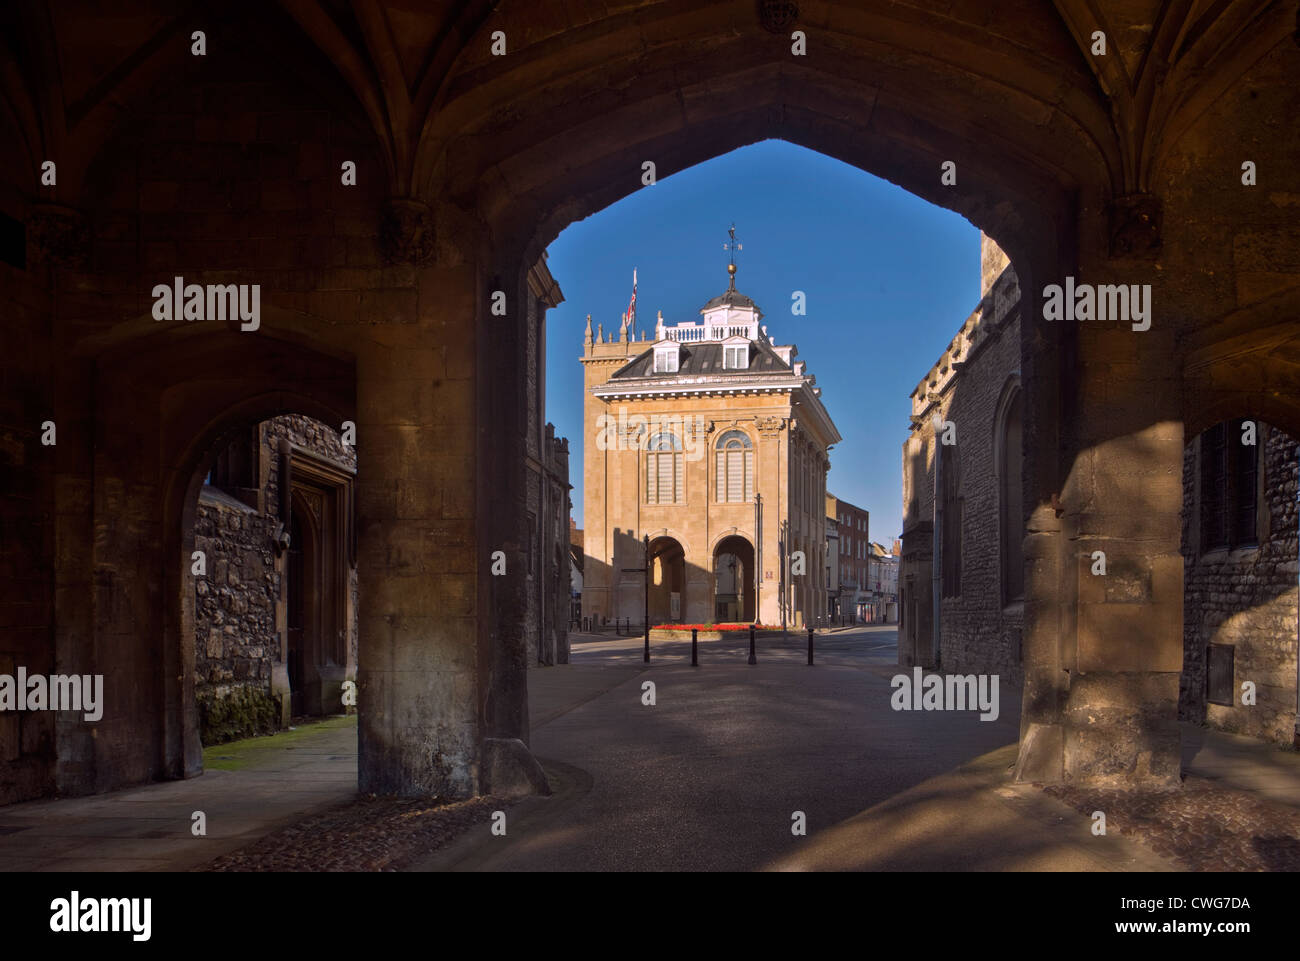 The County Hall, Abingdon-on-Thames, seen through the arches of the gateway to Abingdon Abbey grounds. Stock Photo